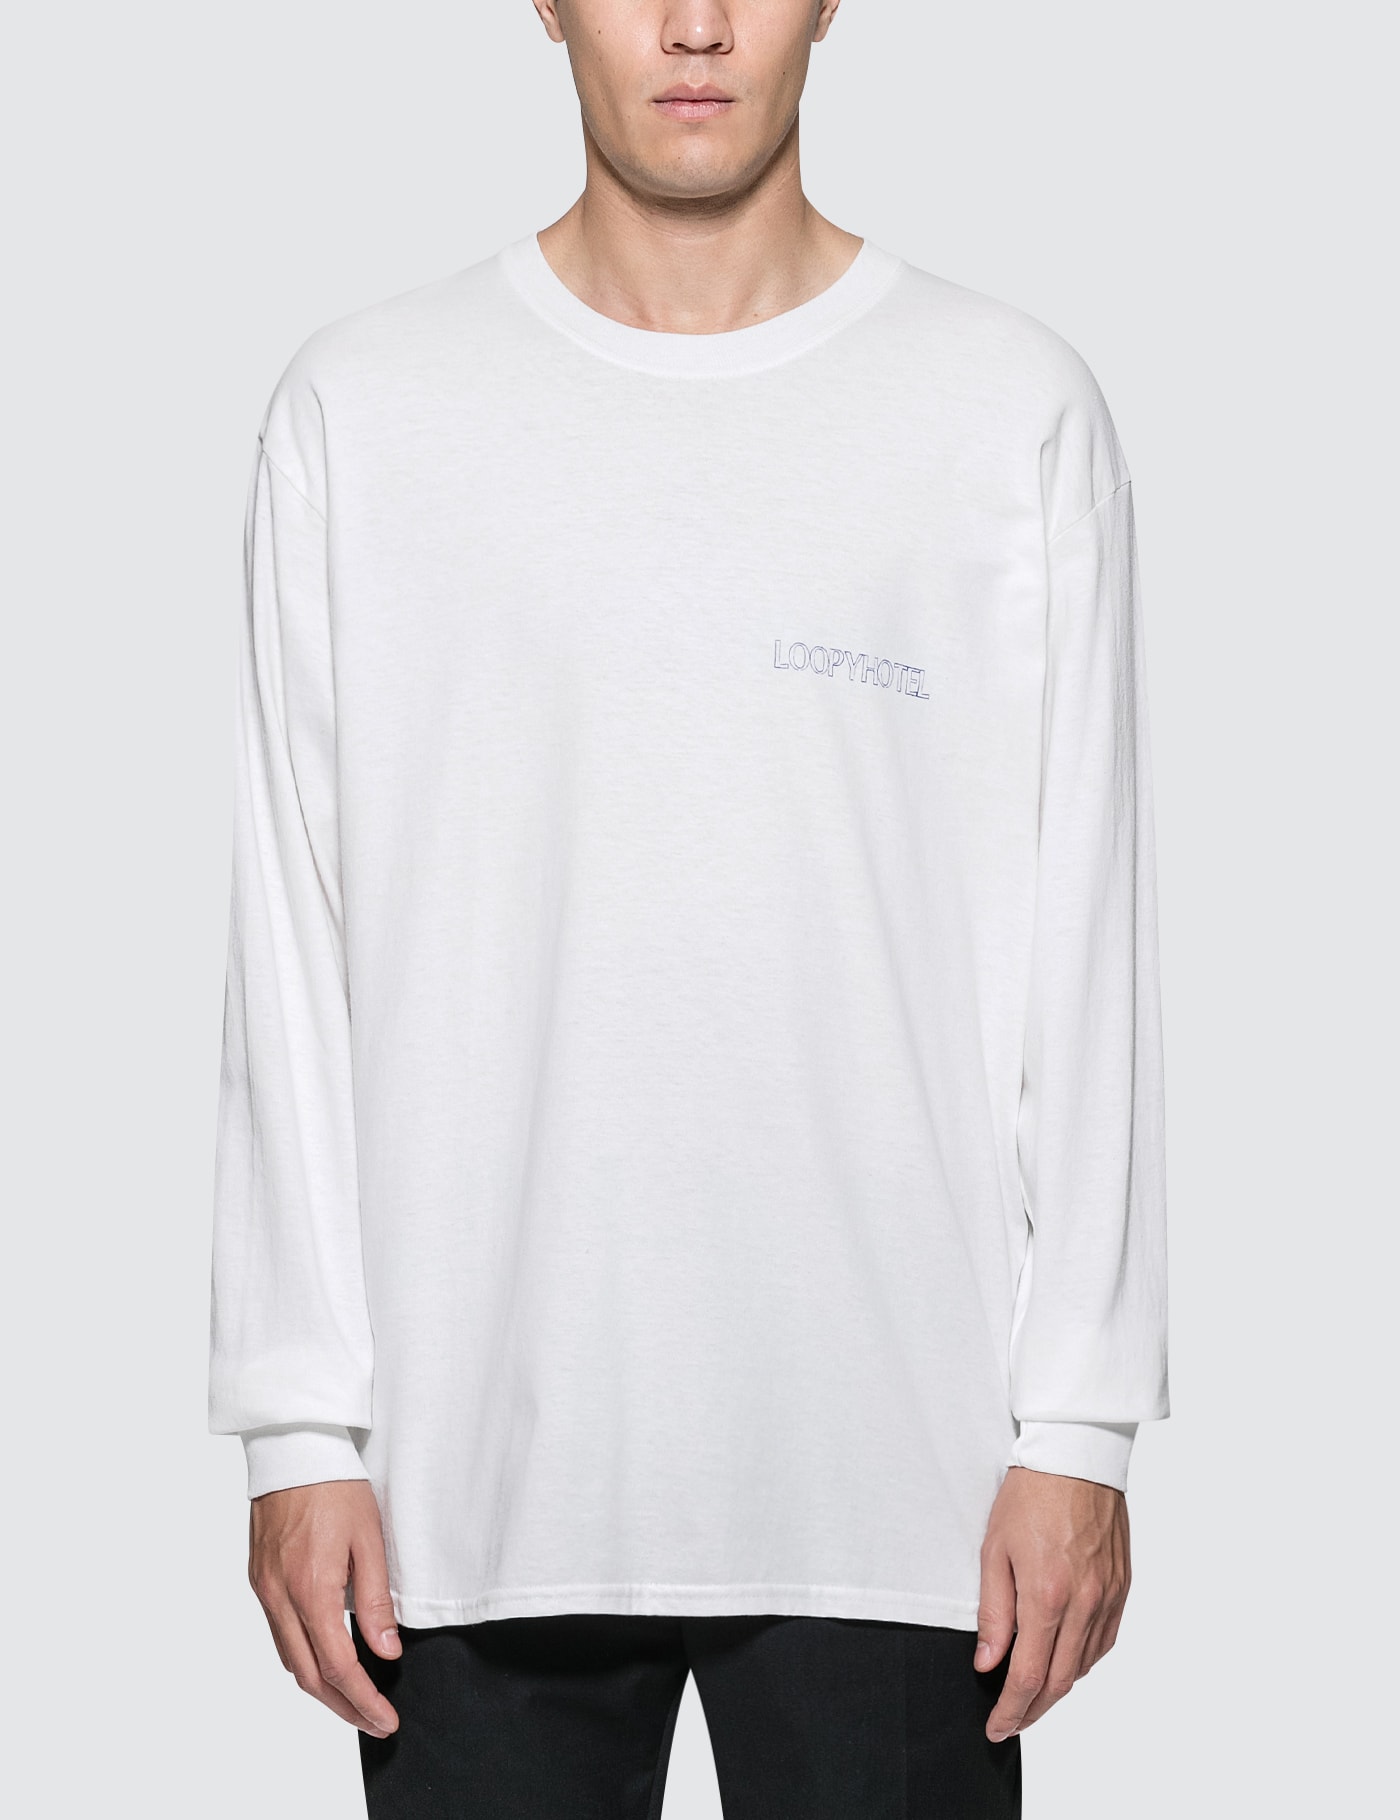 Loopy Hotel - Punchdrunk L/S T-Shirt | HBX